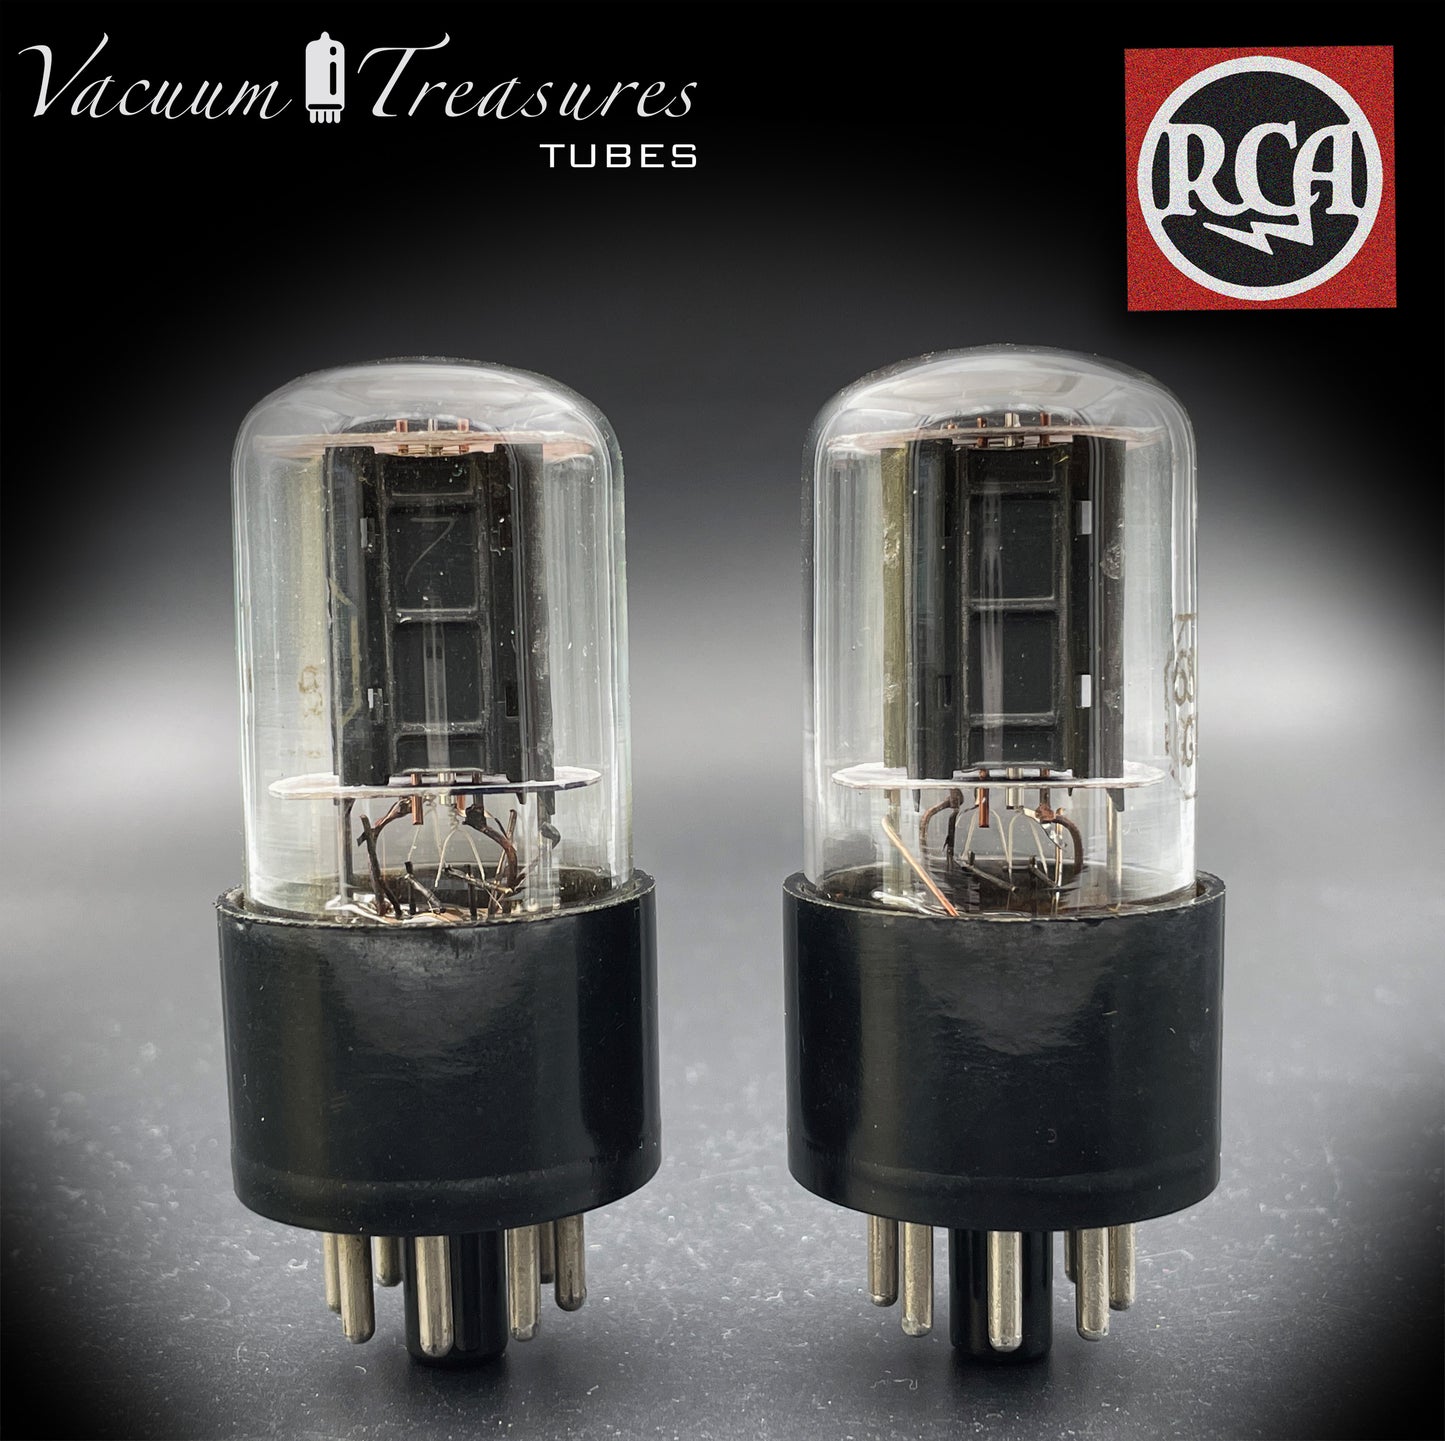 6SN7 GTB RCA Black Plates Square Getter Matched Tubes Made in USA '50s